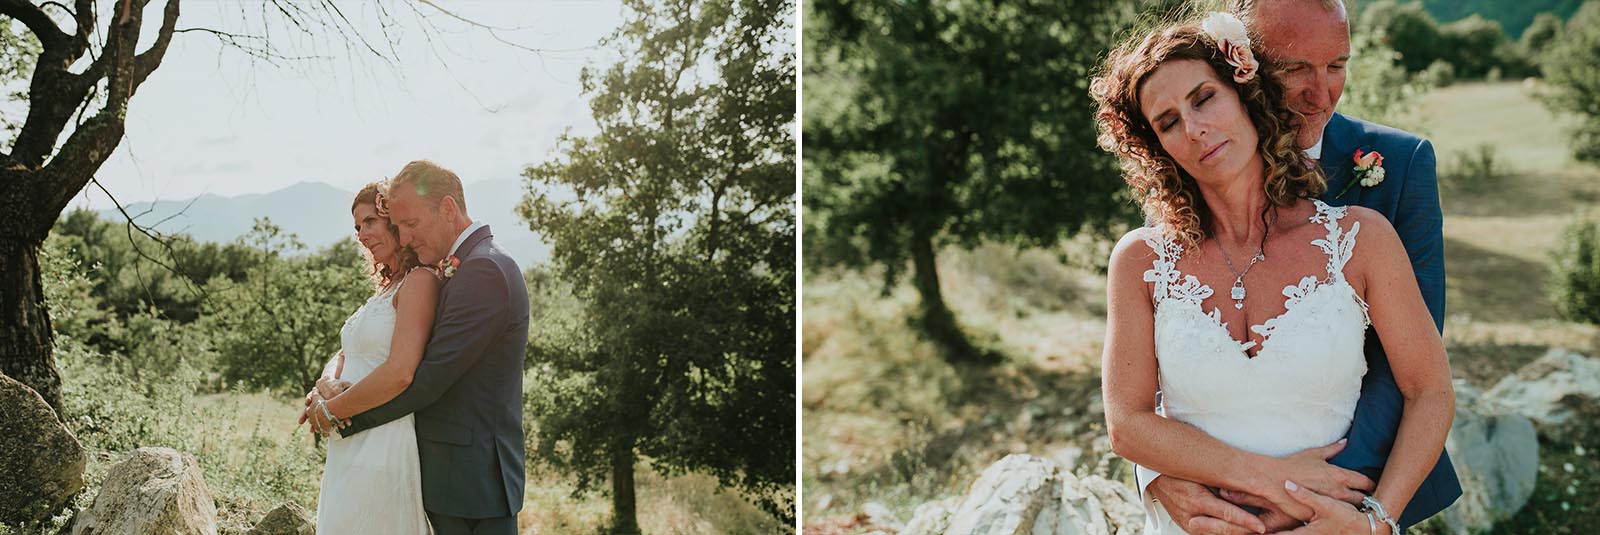 natural portraits of bride and groom in Tuscany countryside